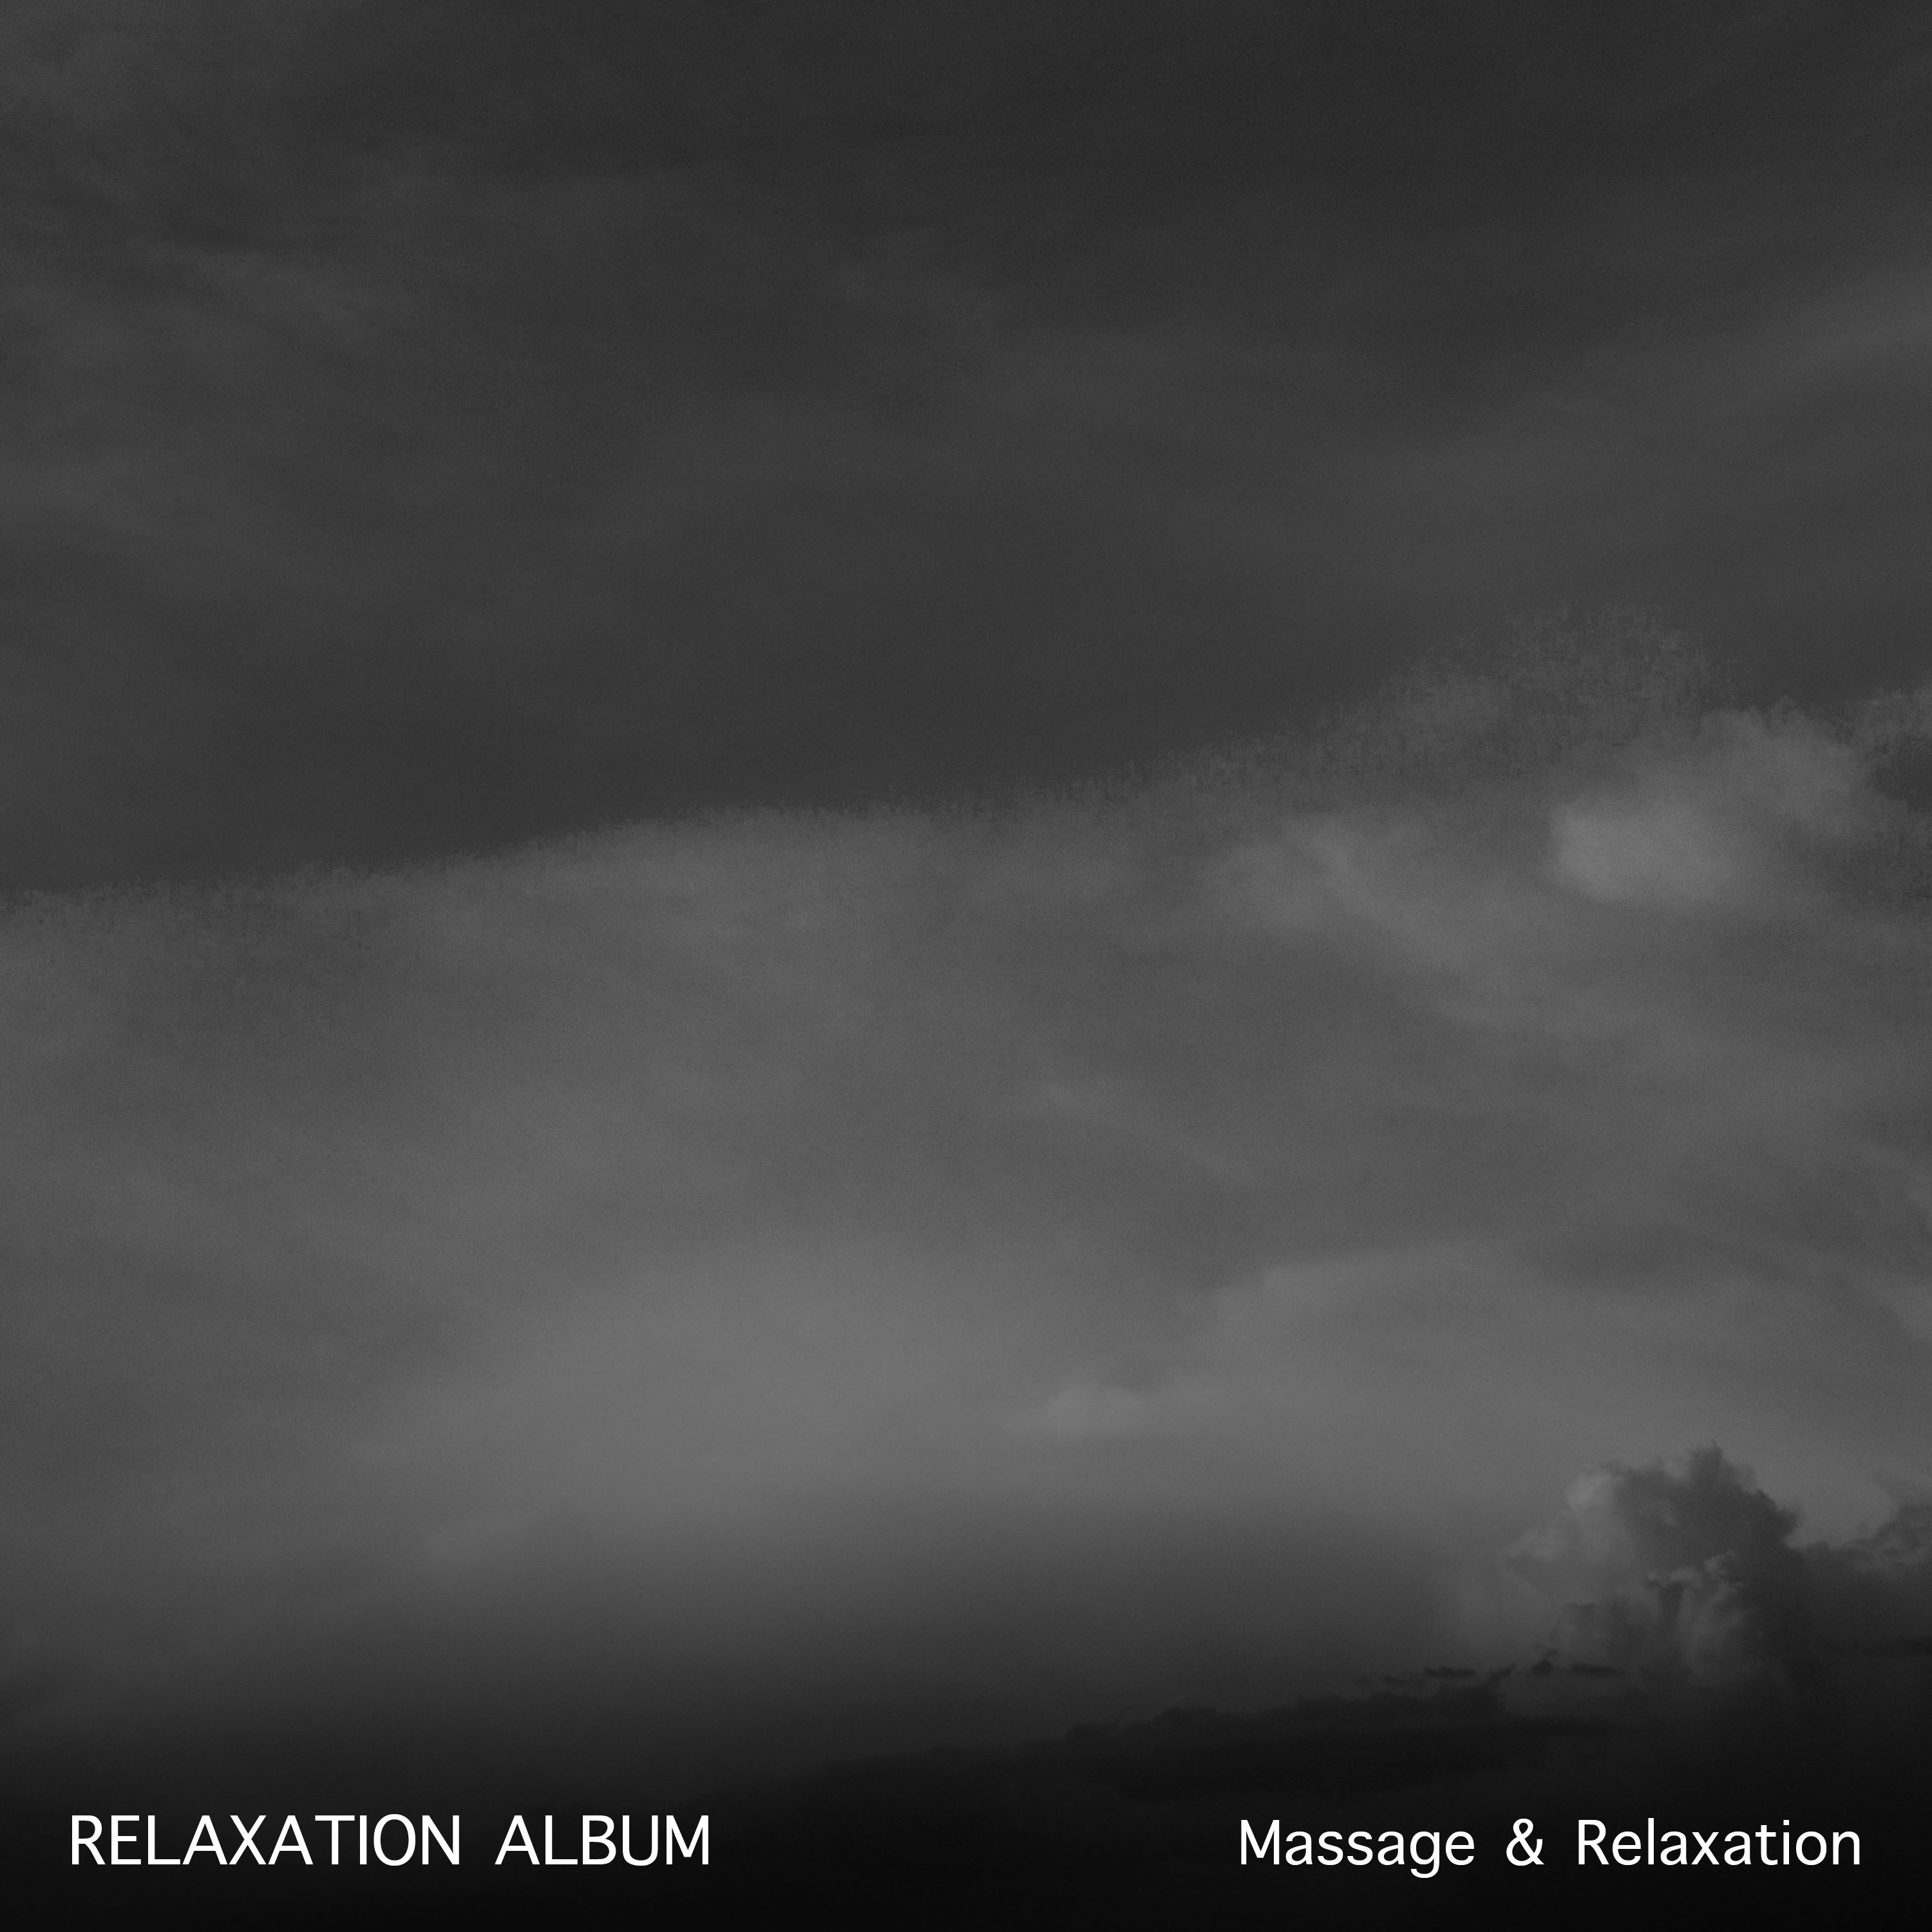 2018 Ultimate Relaxation Album for Massage and Relaxation